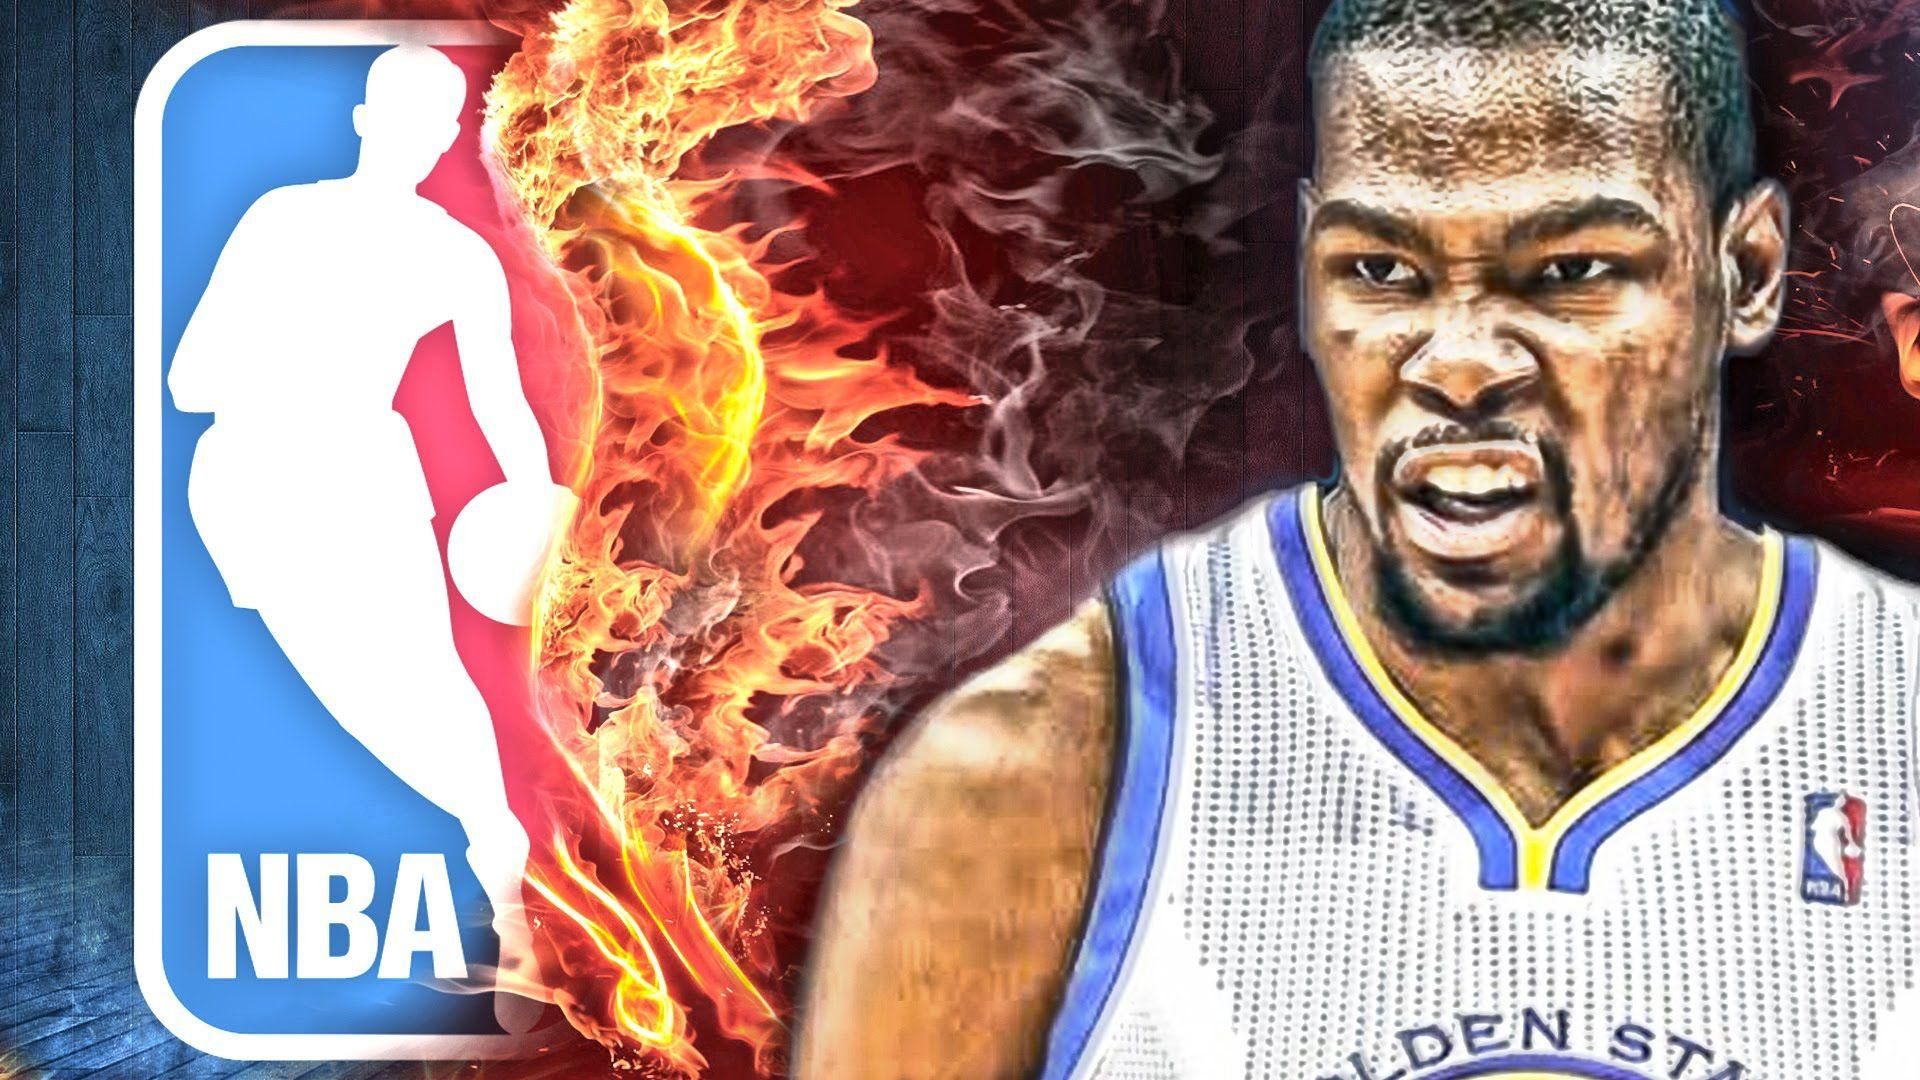 Durant Hd Wallpapers